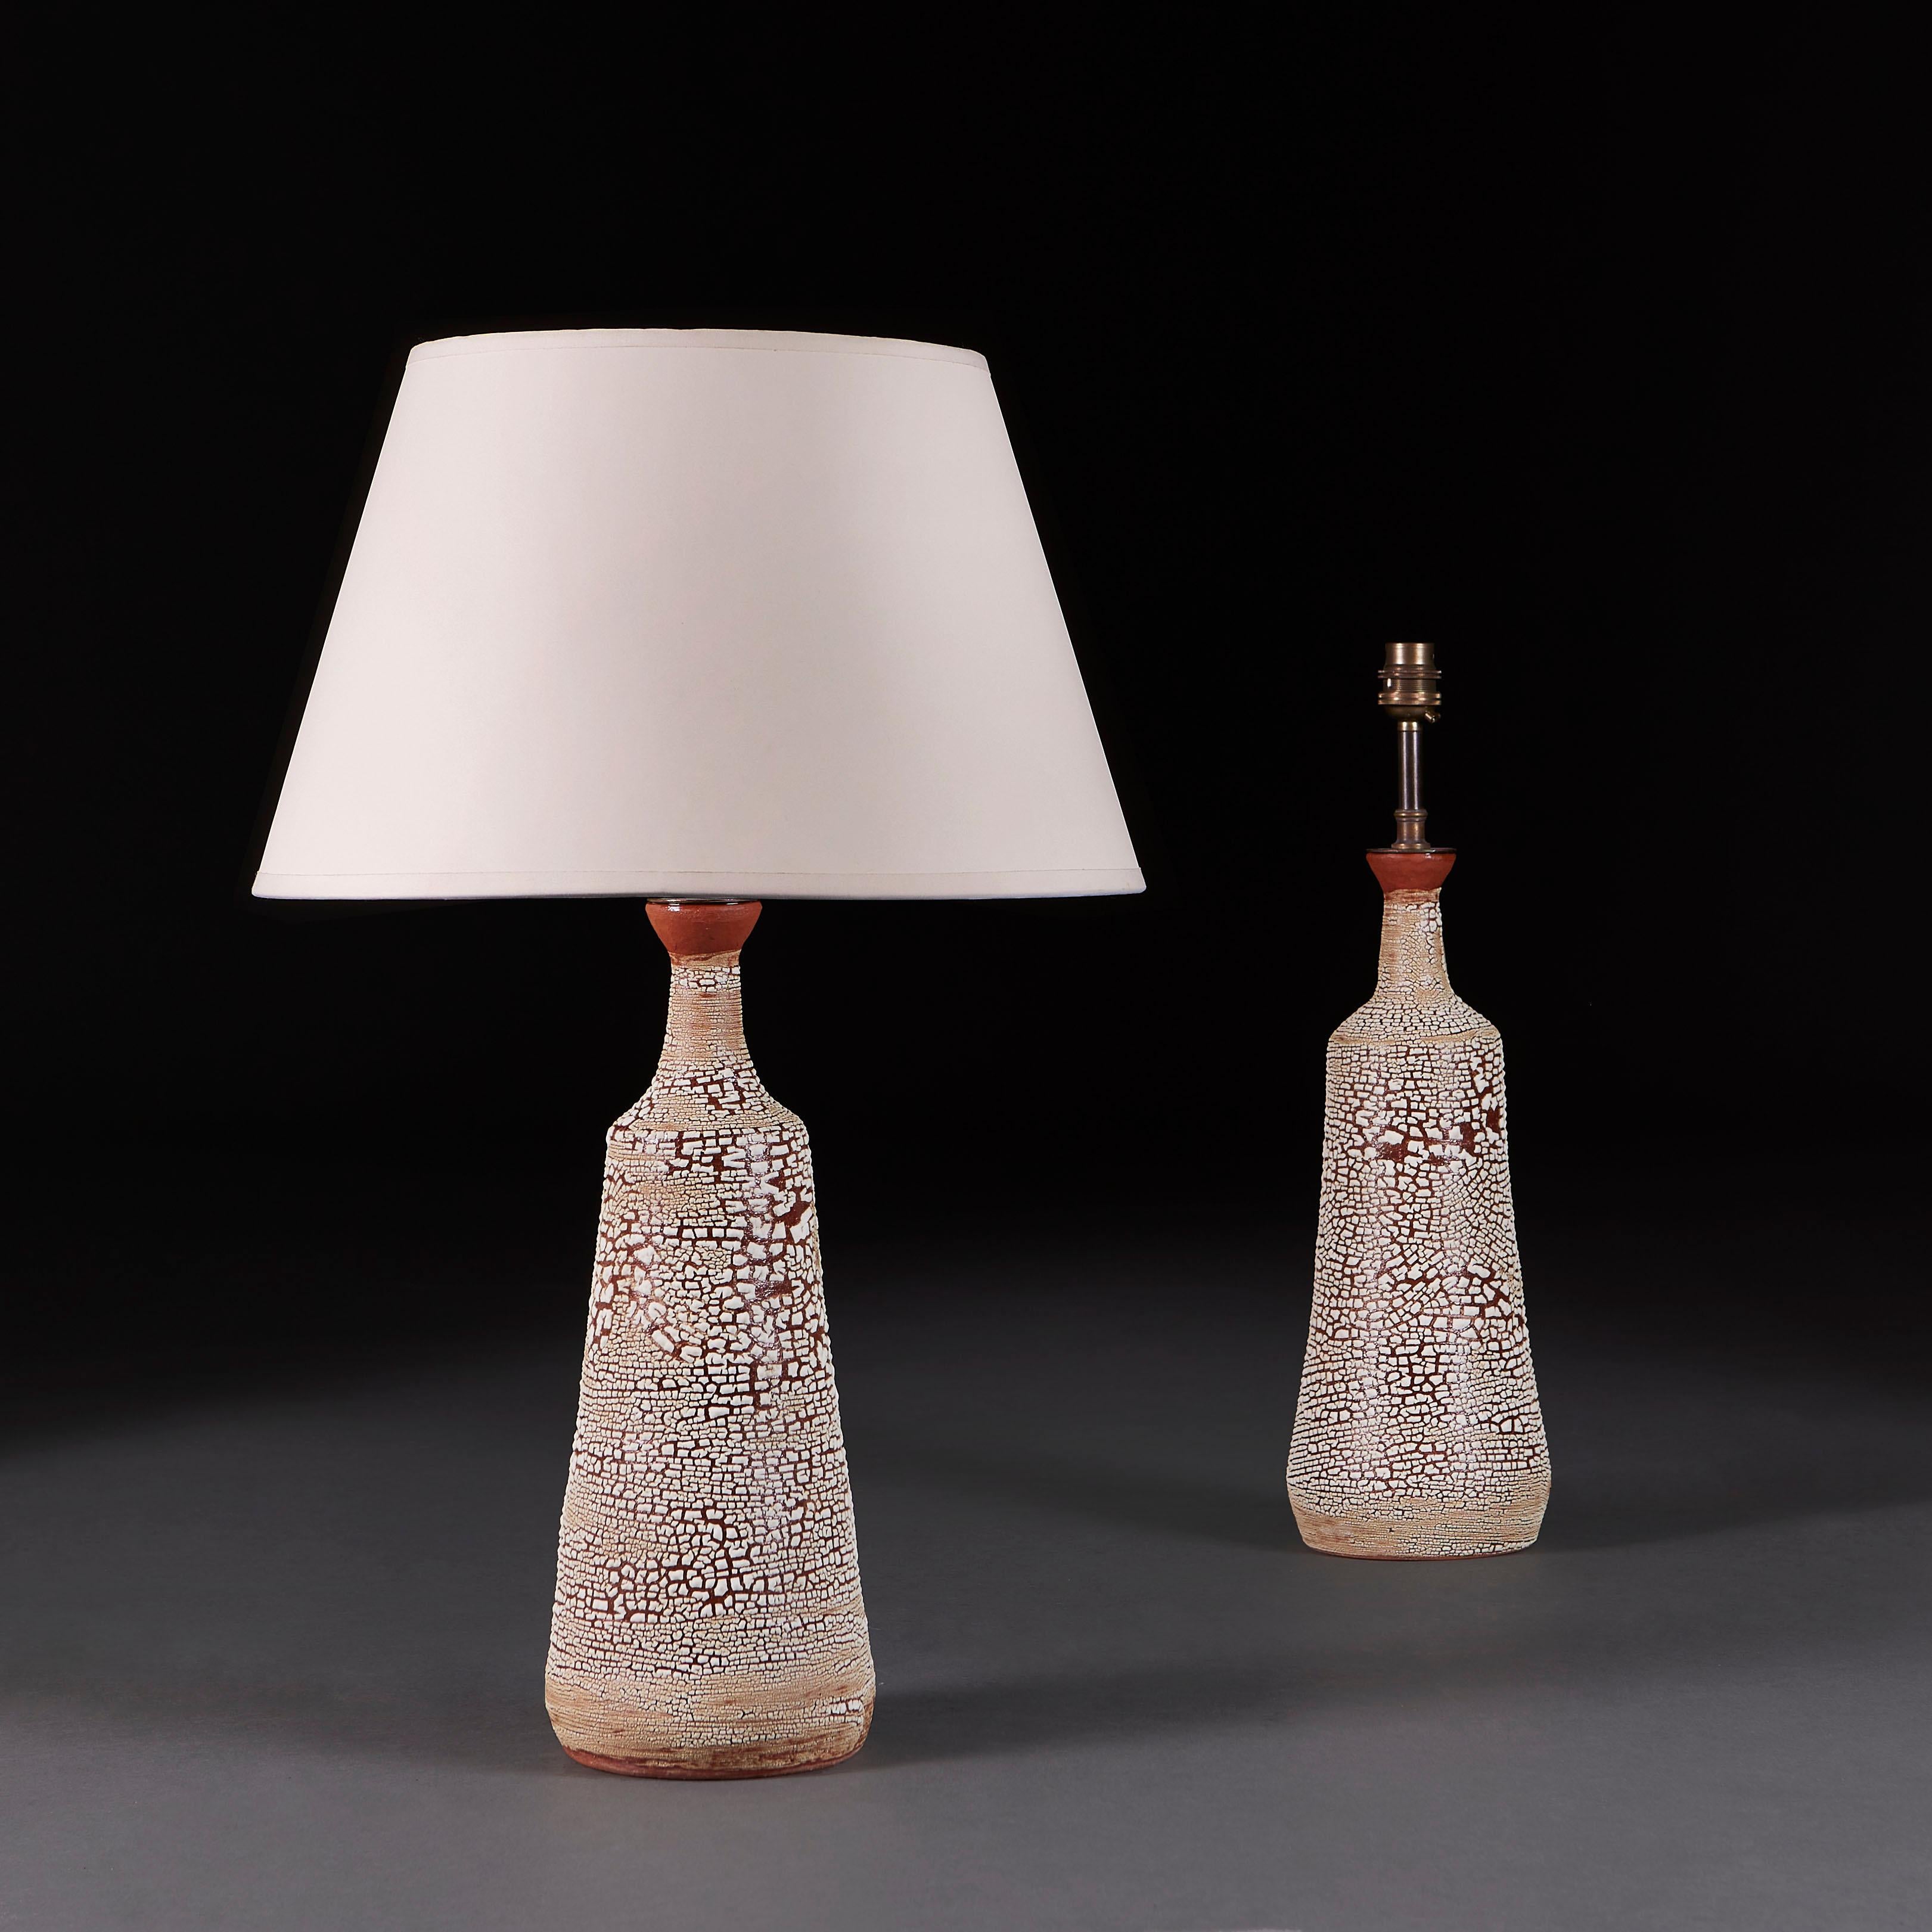 +VAT

England, modern

An unusual pair of terracotta vessels with tapering bottle necks and flared rims, decorated with a white crackle glaze, now mounted as lamps.

Height of vase 35.00cm
Height with shade 60.00cm
Diameter of base 13.00cm

Lead